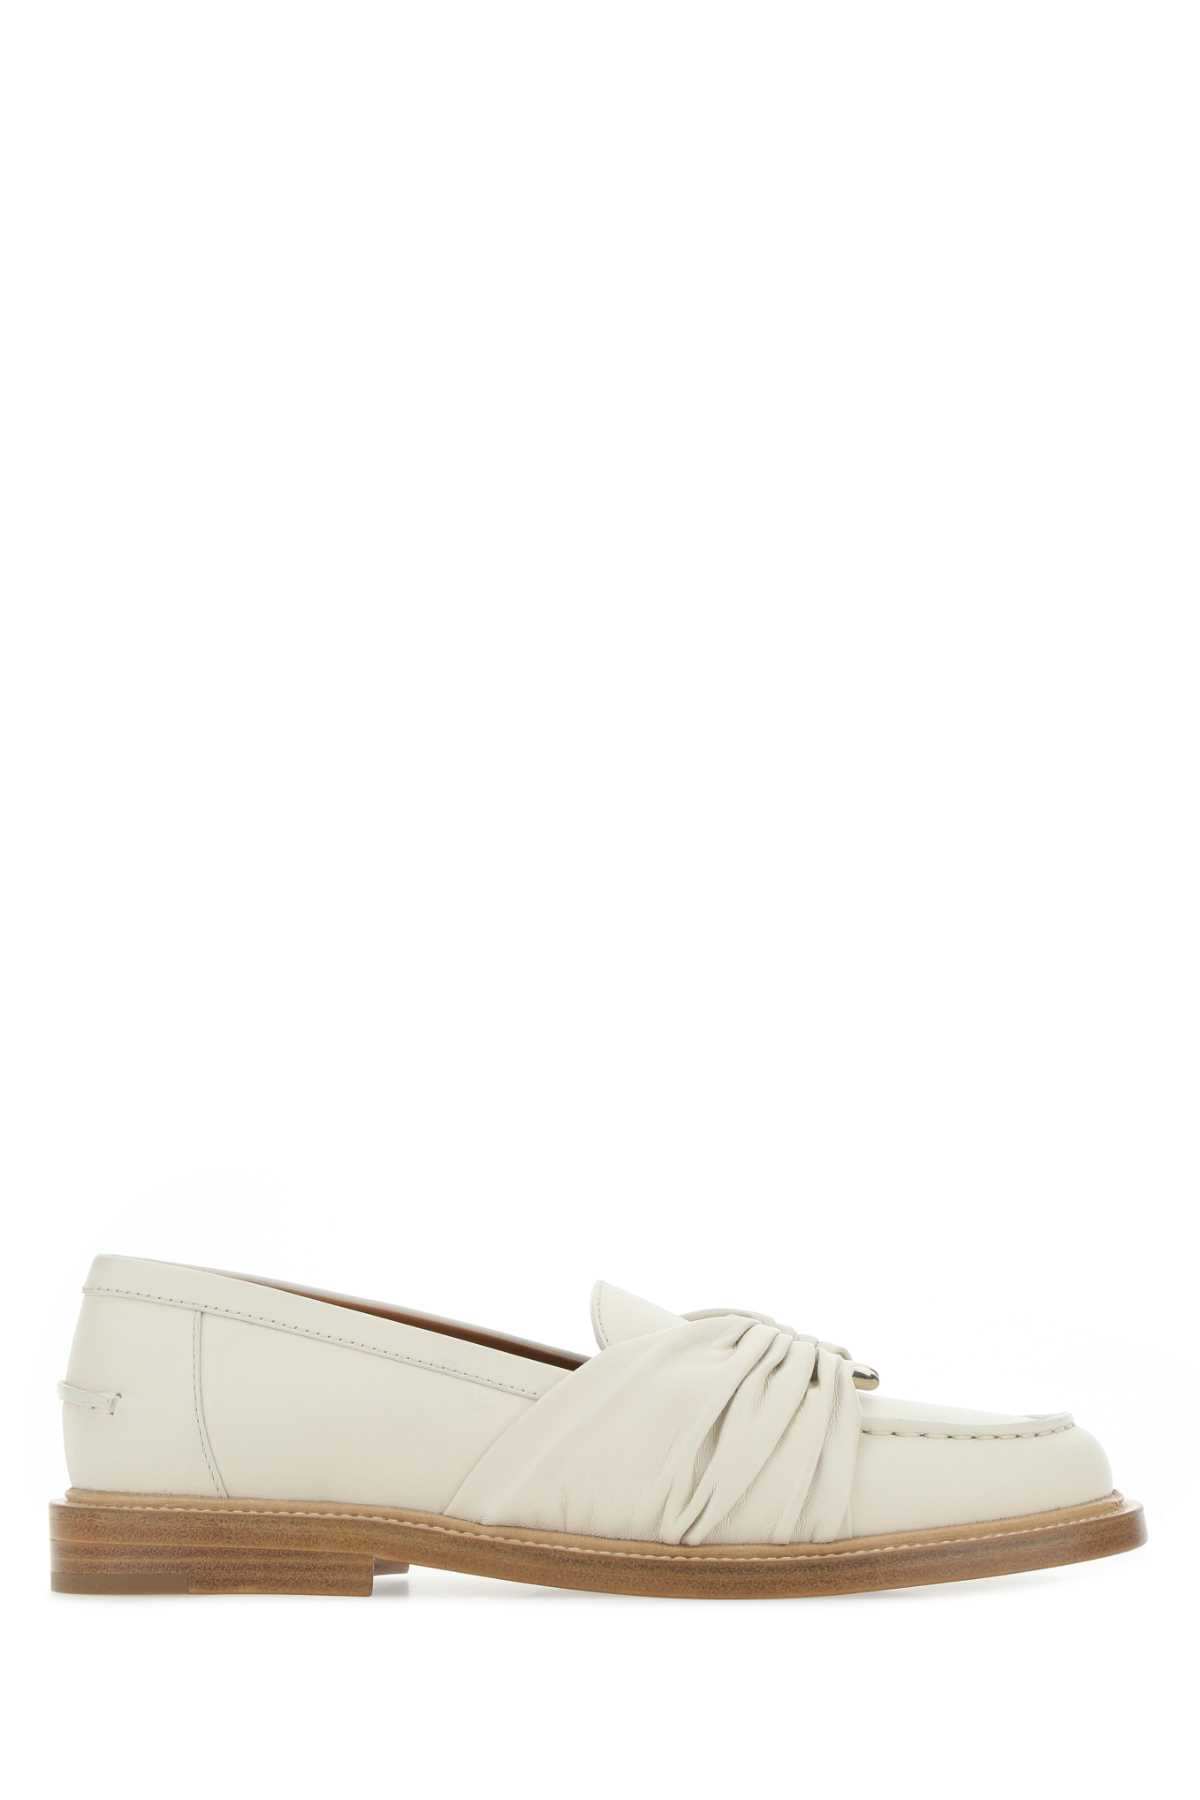 Chloé Ivory Leather Loafers In 122